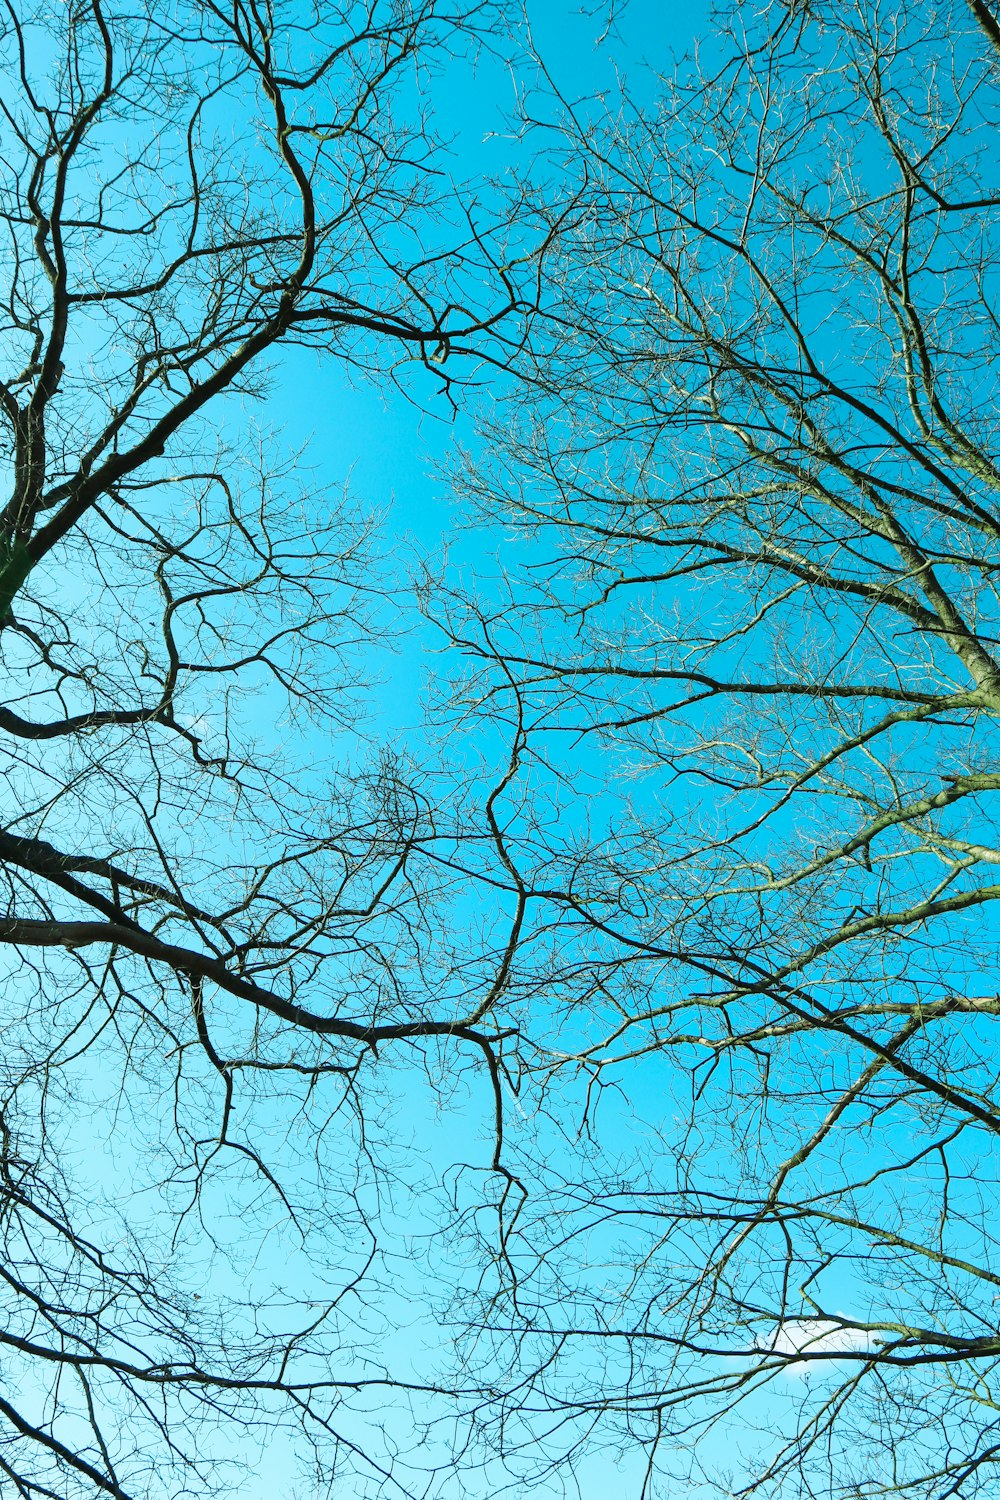 looking up at the tops of bare trees